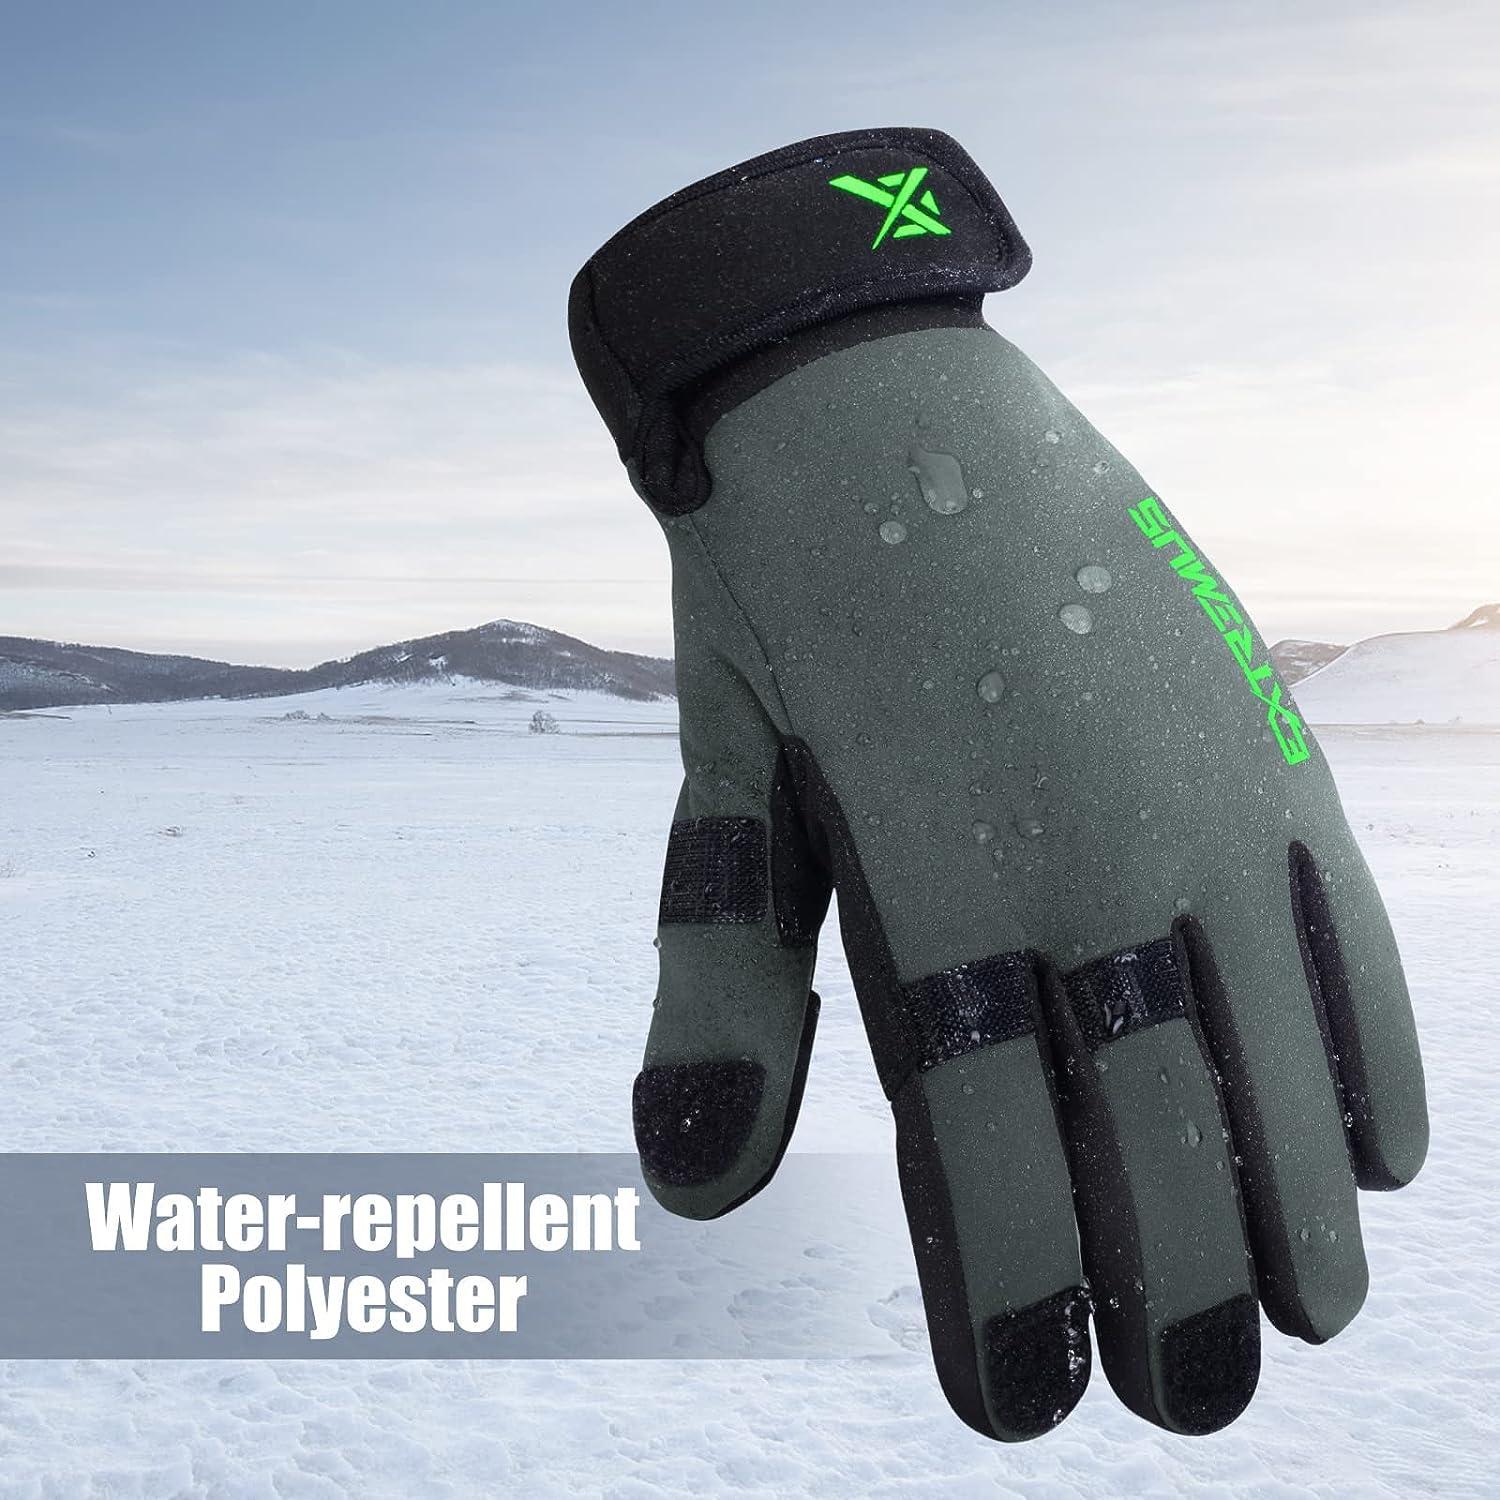  Extremus Winter Gloves - Touchscreen Water Resistant Warm  Fishing Gloves For Cold Weather - Men And Womens Gloves For Ice Fishing